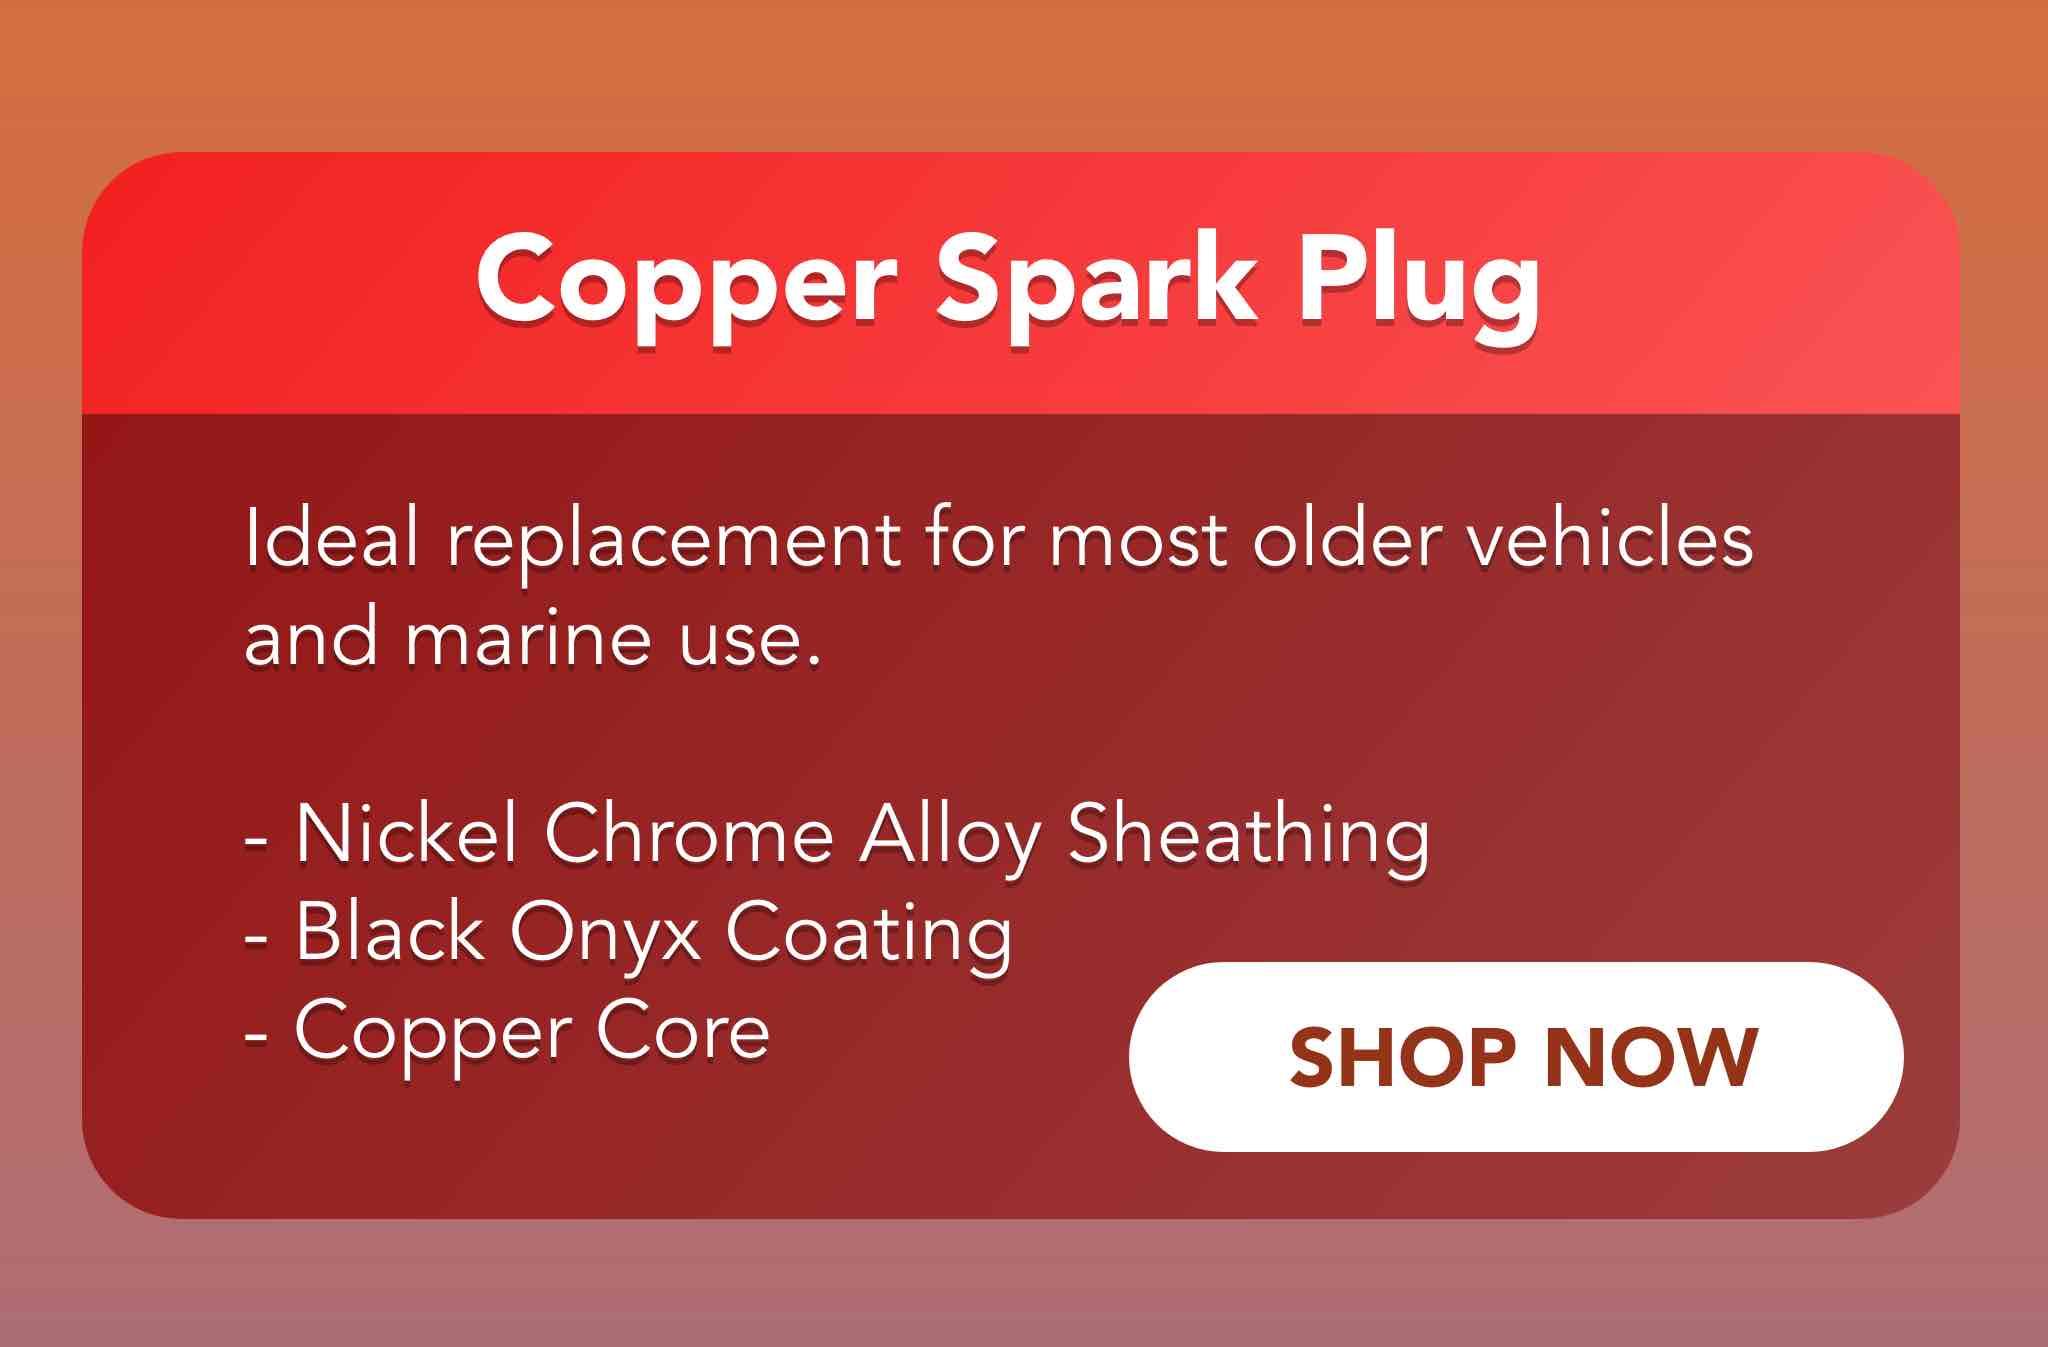 Ideal replacement for most older vehicles and marine use.